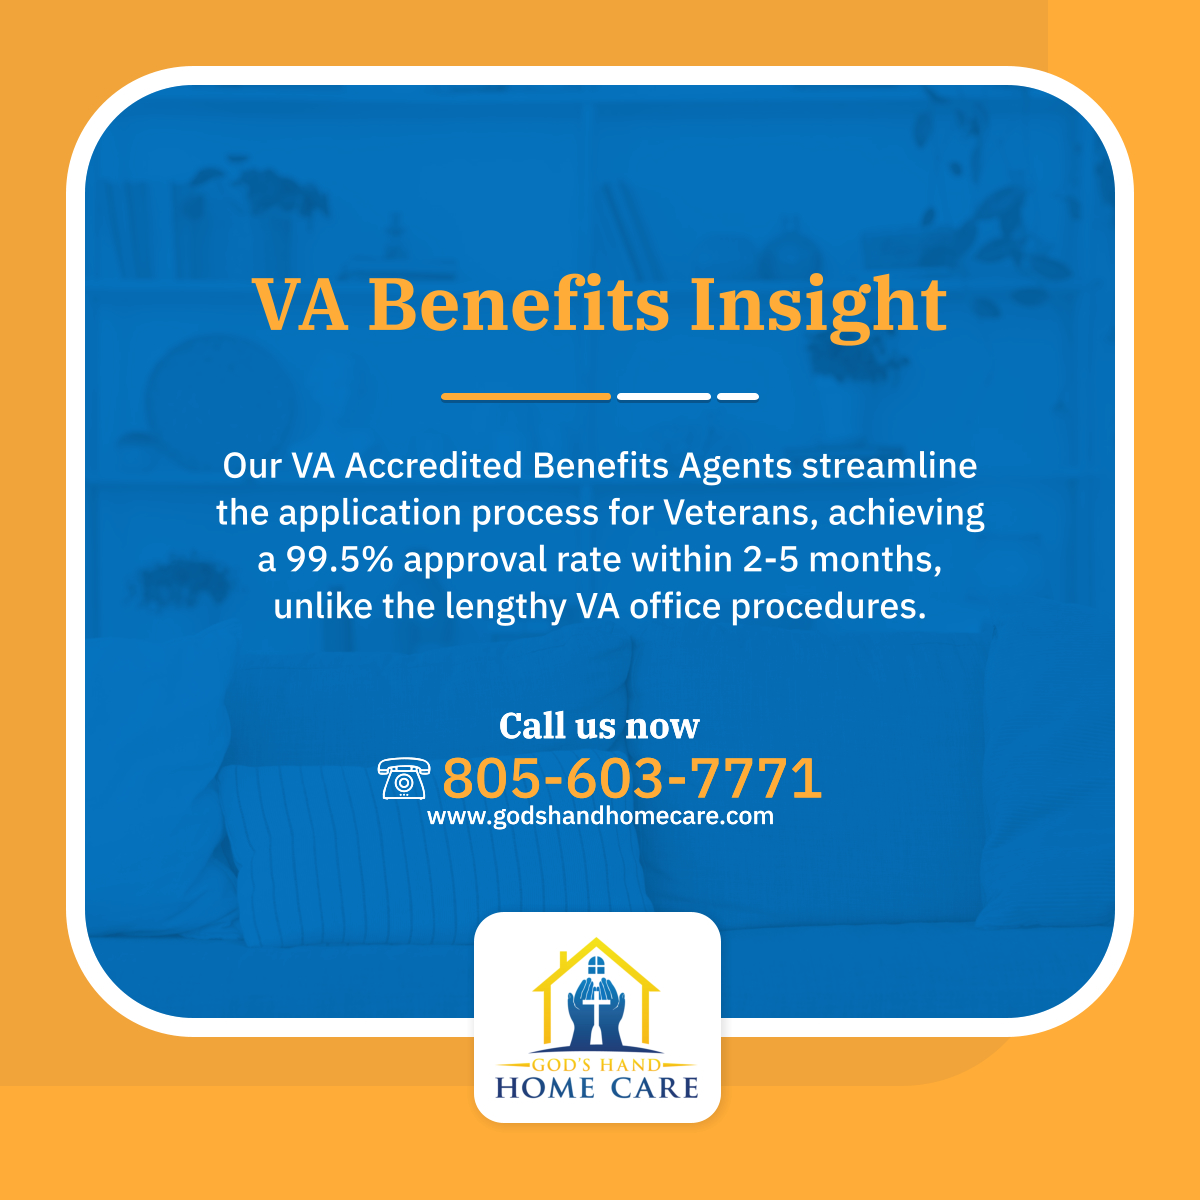 Did you know our experts can expedite VA benefits applications from home, avoiding the daunting process at local VA offices? A smoother path to deserved benefits. 

#OxnardCA #HomeCare #VeteranSupport